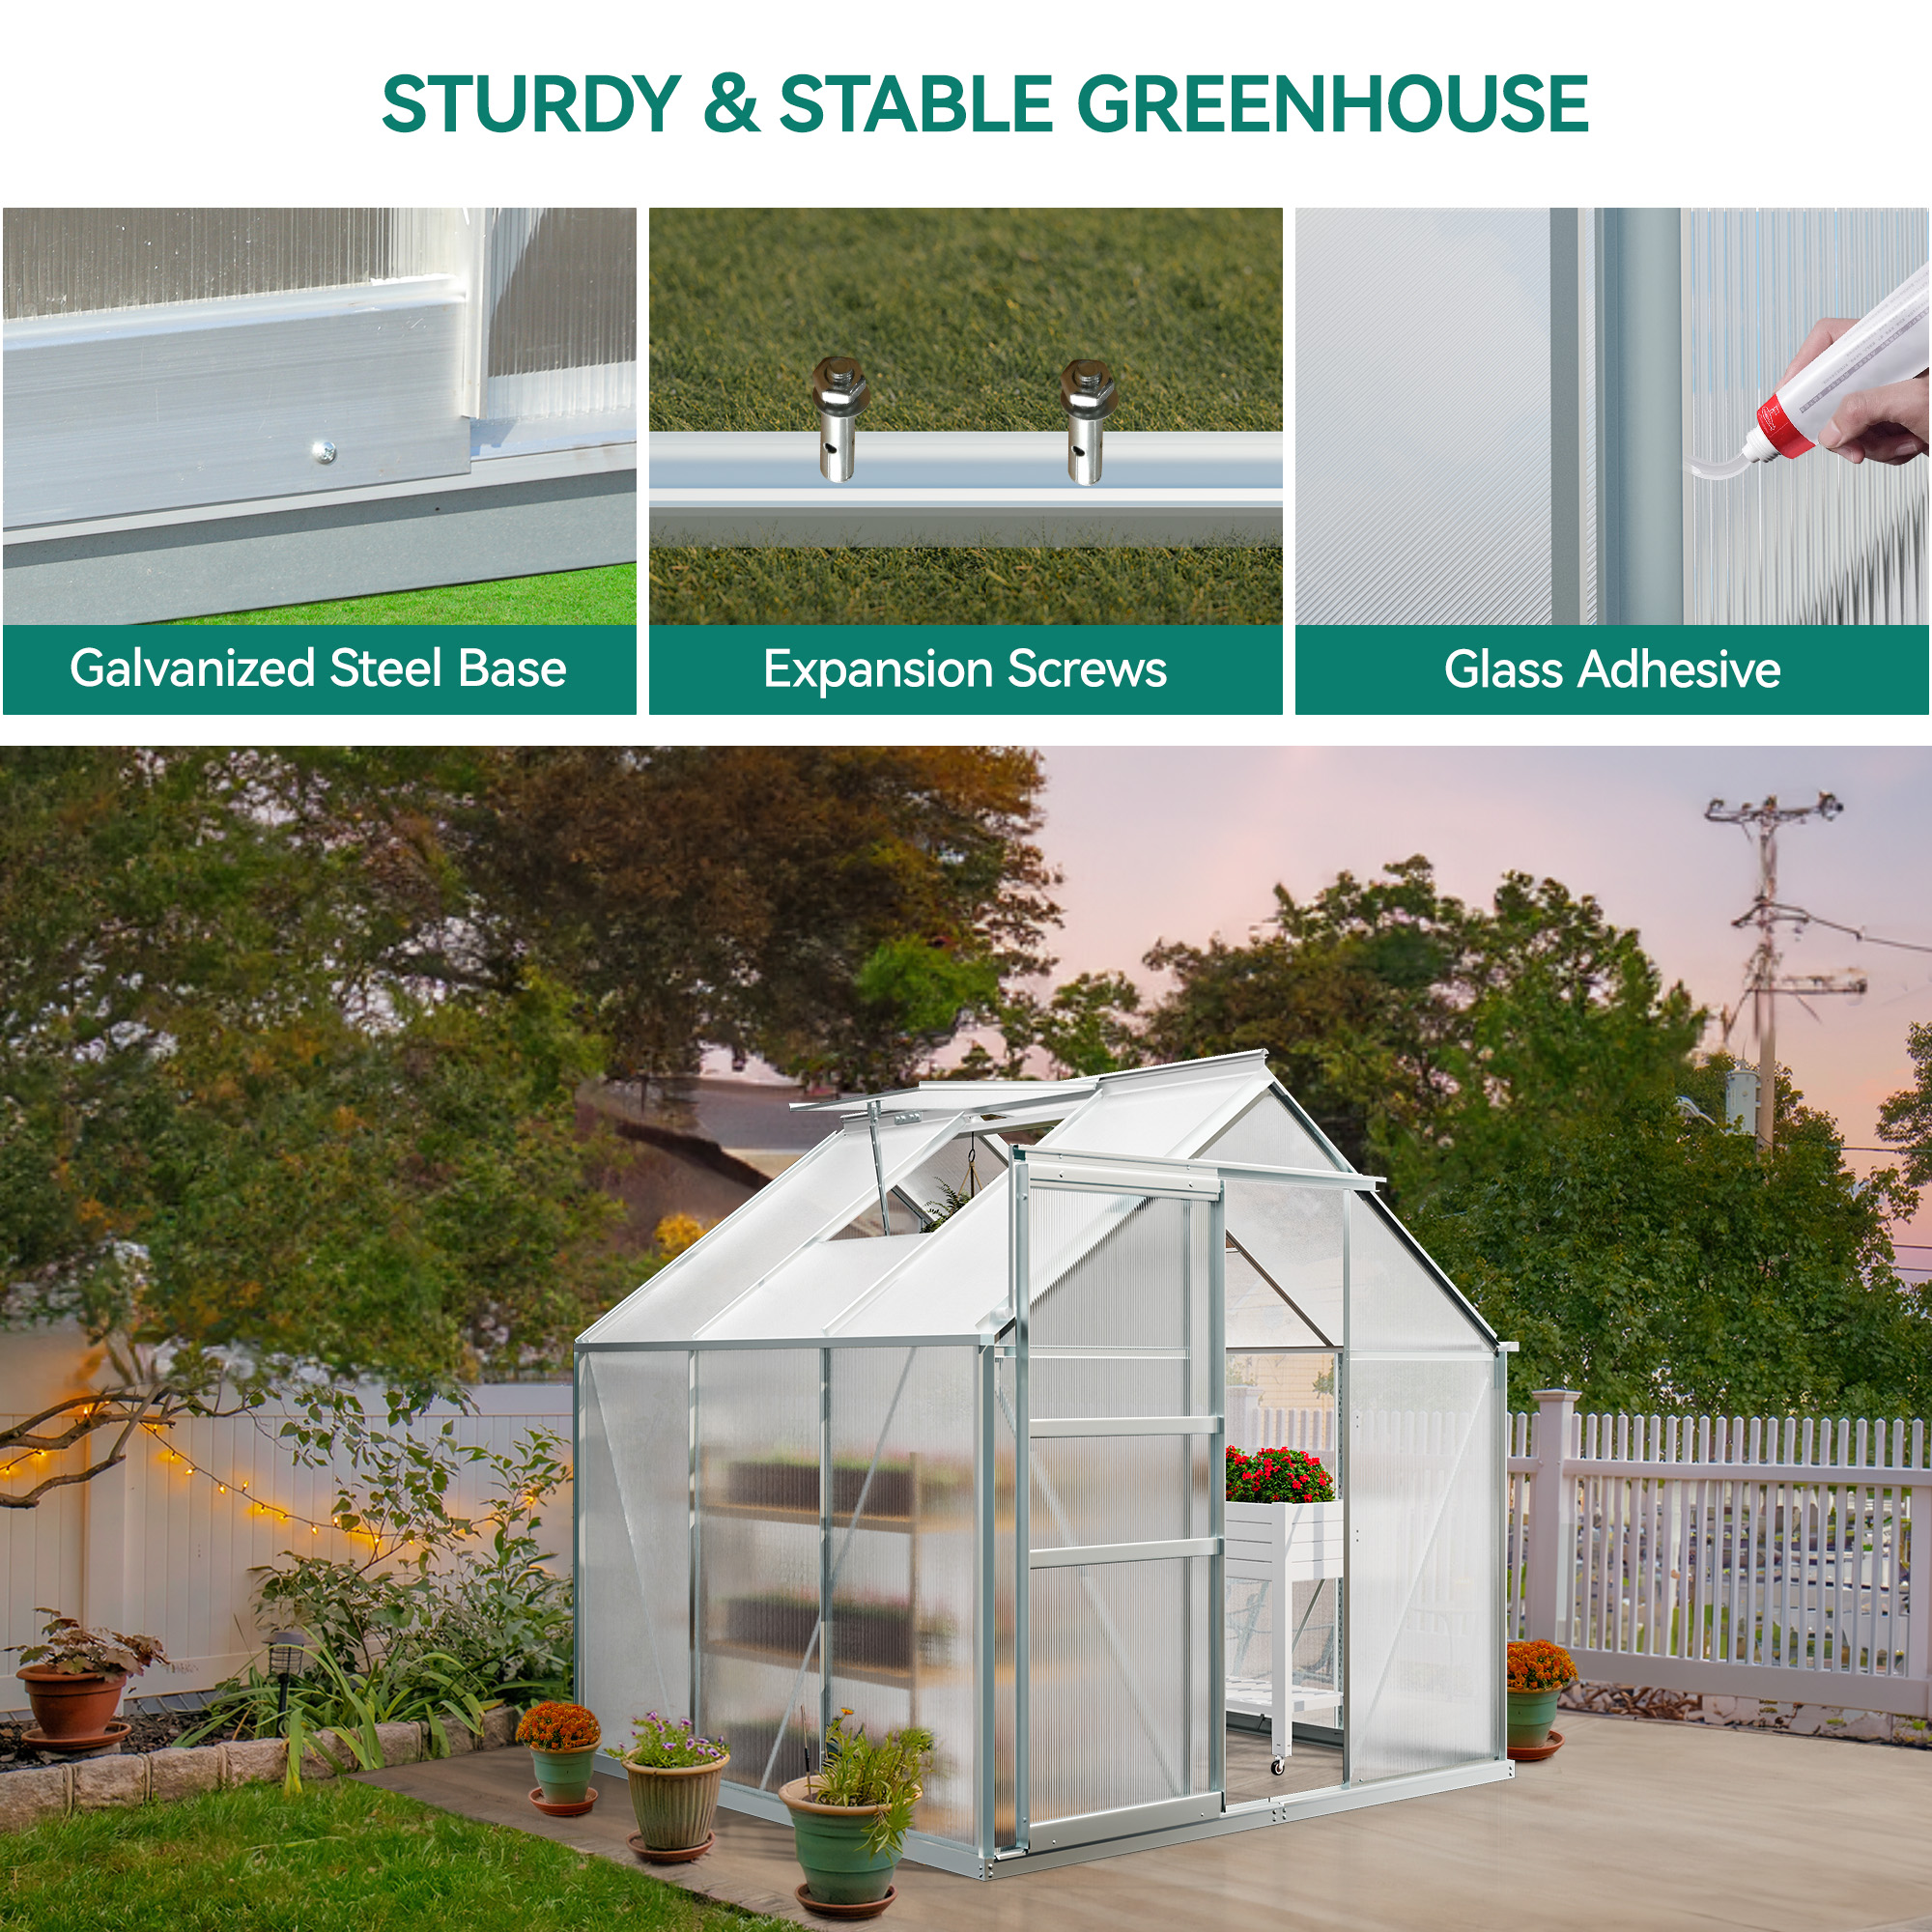 Dextrus 6x6FT Polycarbonate Greenhouse Heavy Duty Green Houses Outdoor Aluminum Greenhouses with Sliding Doors Vent Window Premium Walk-in Greenhouse Large Sun House for Garden Backyard, Matte Sliver - image 3 of 10